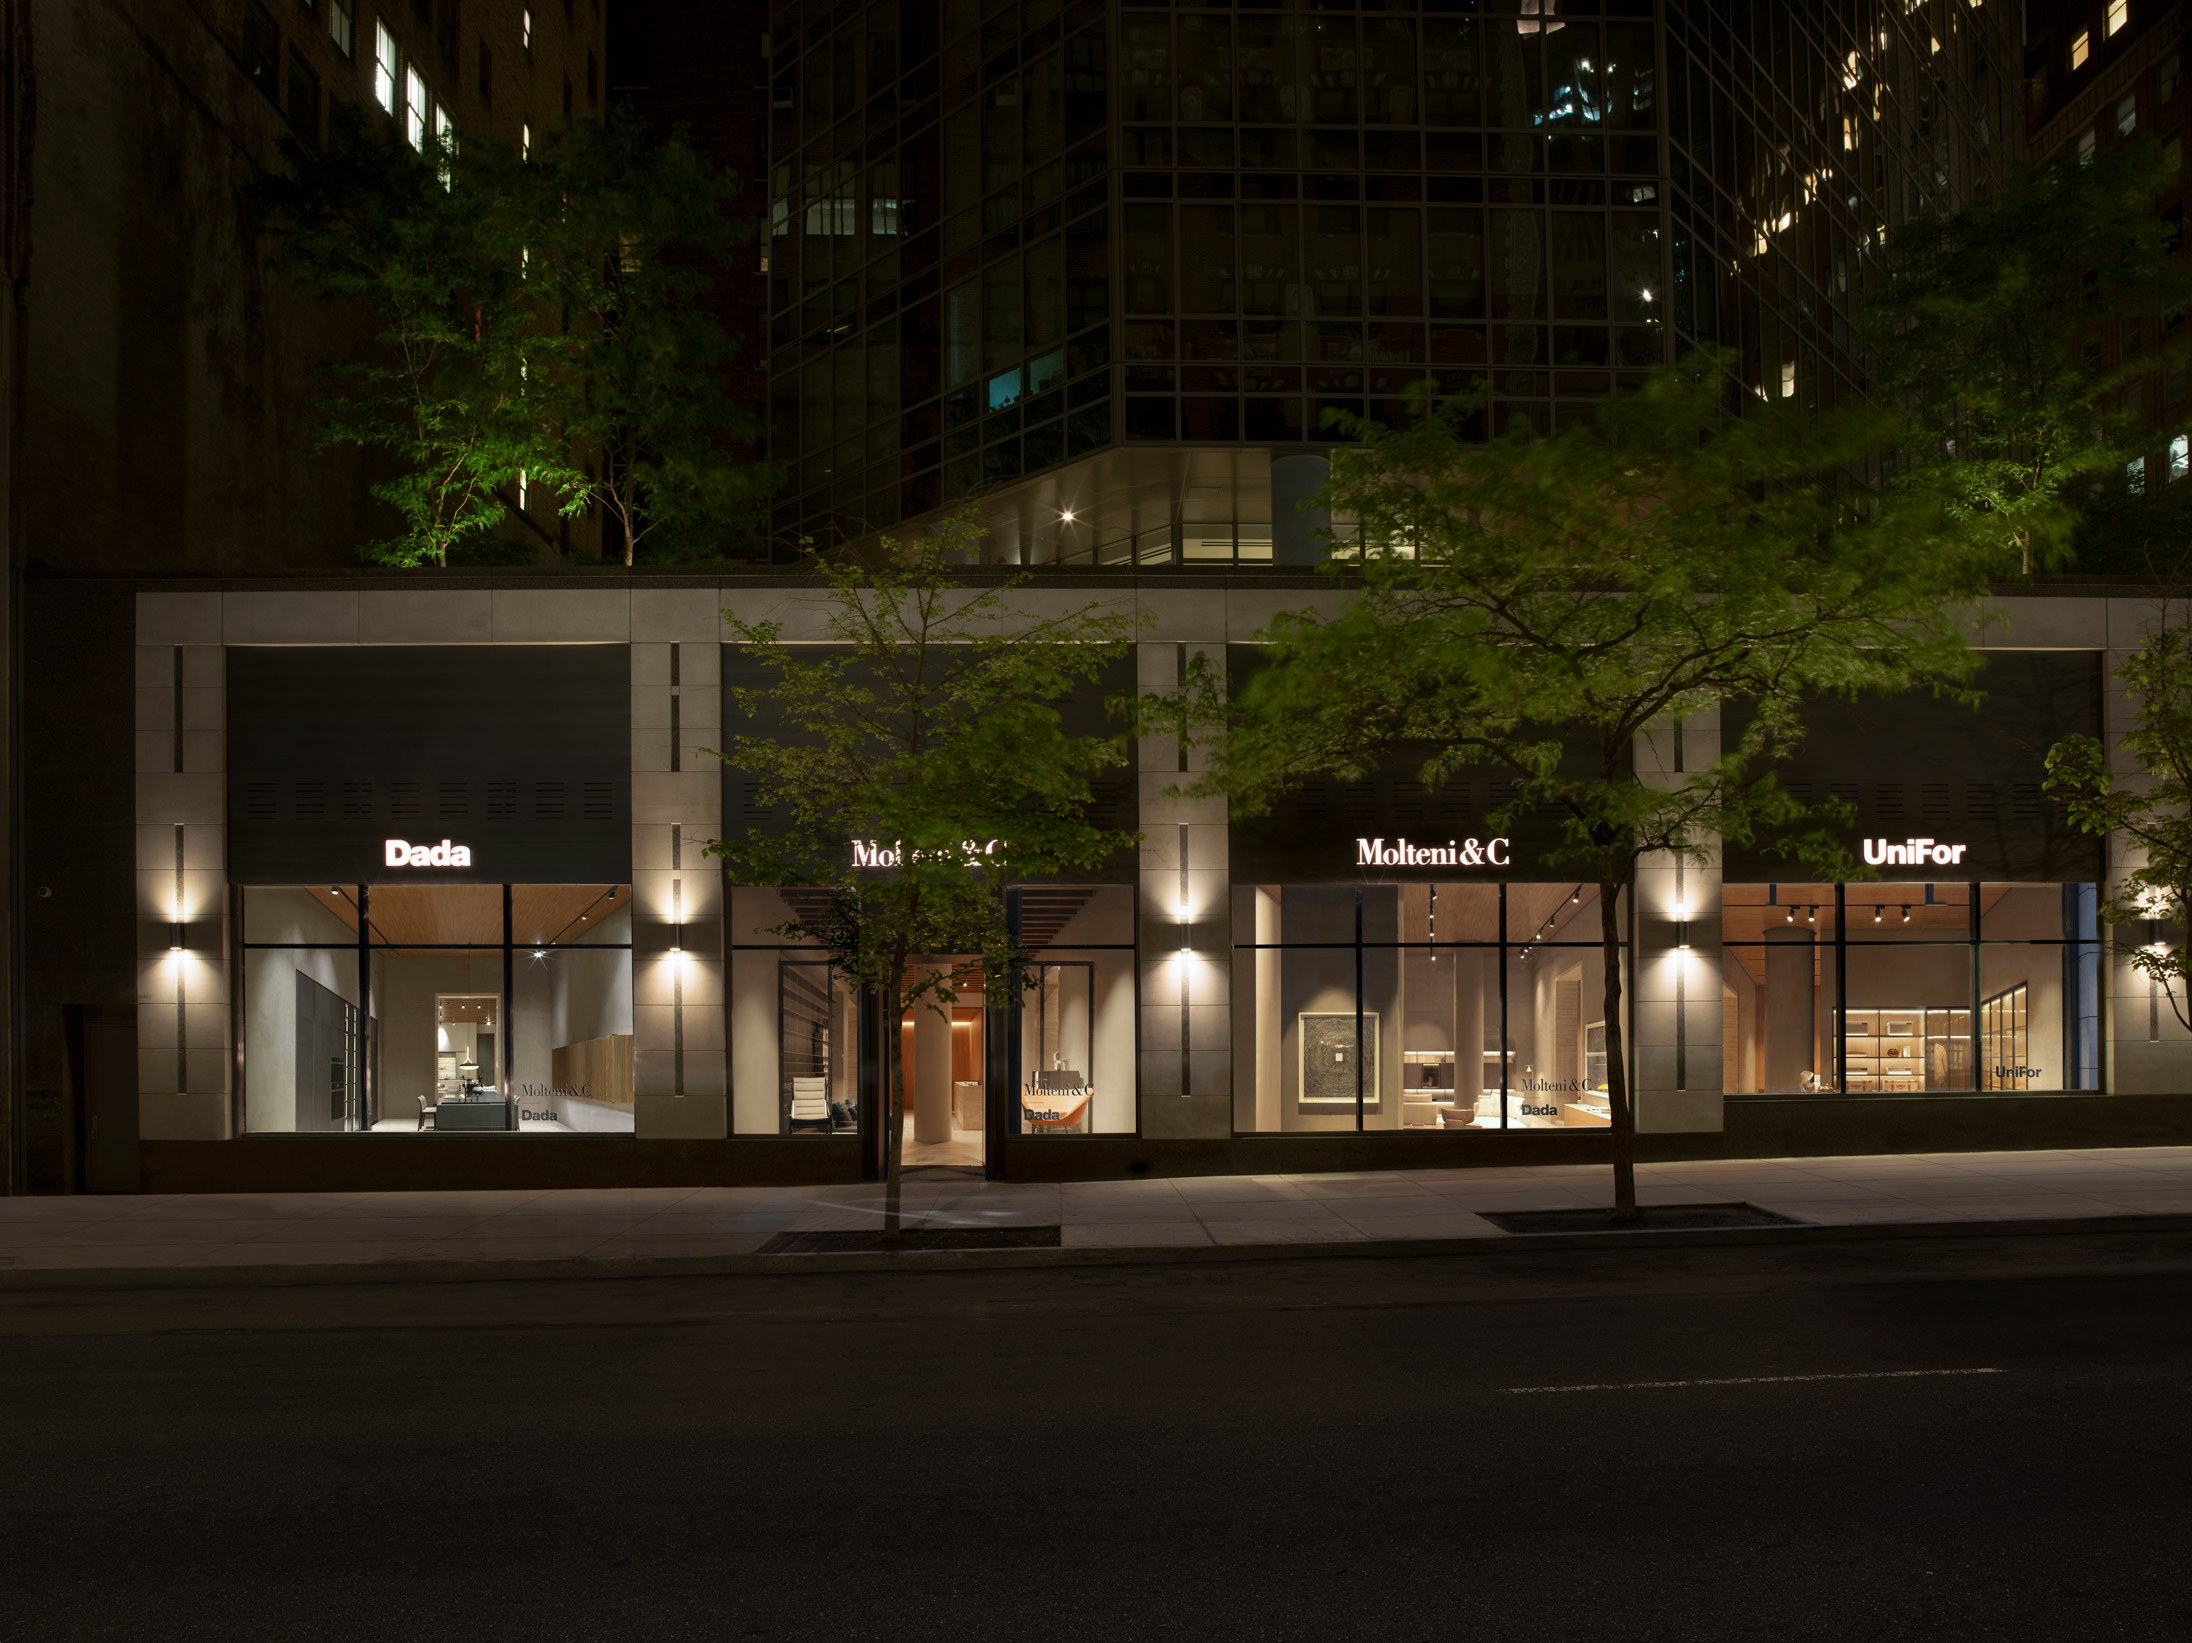 Molteni&C|Dada New York Flagship Store presents the latest Collection